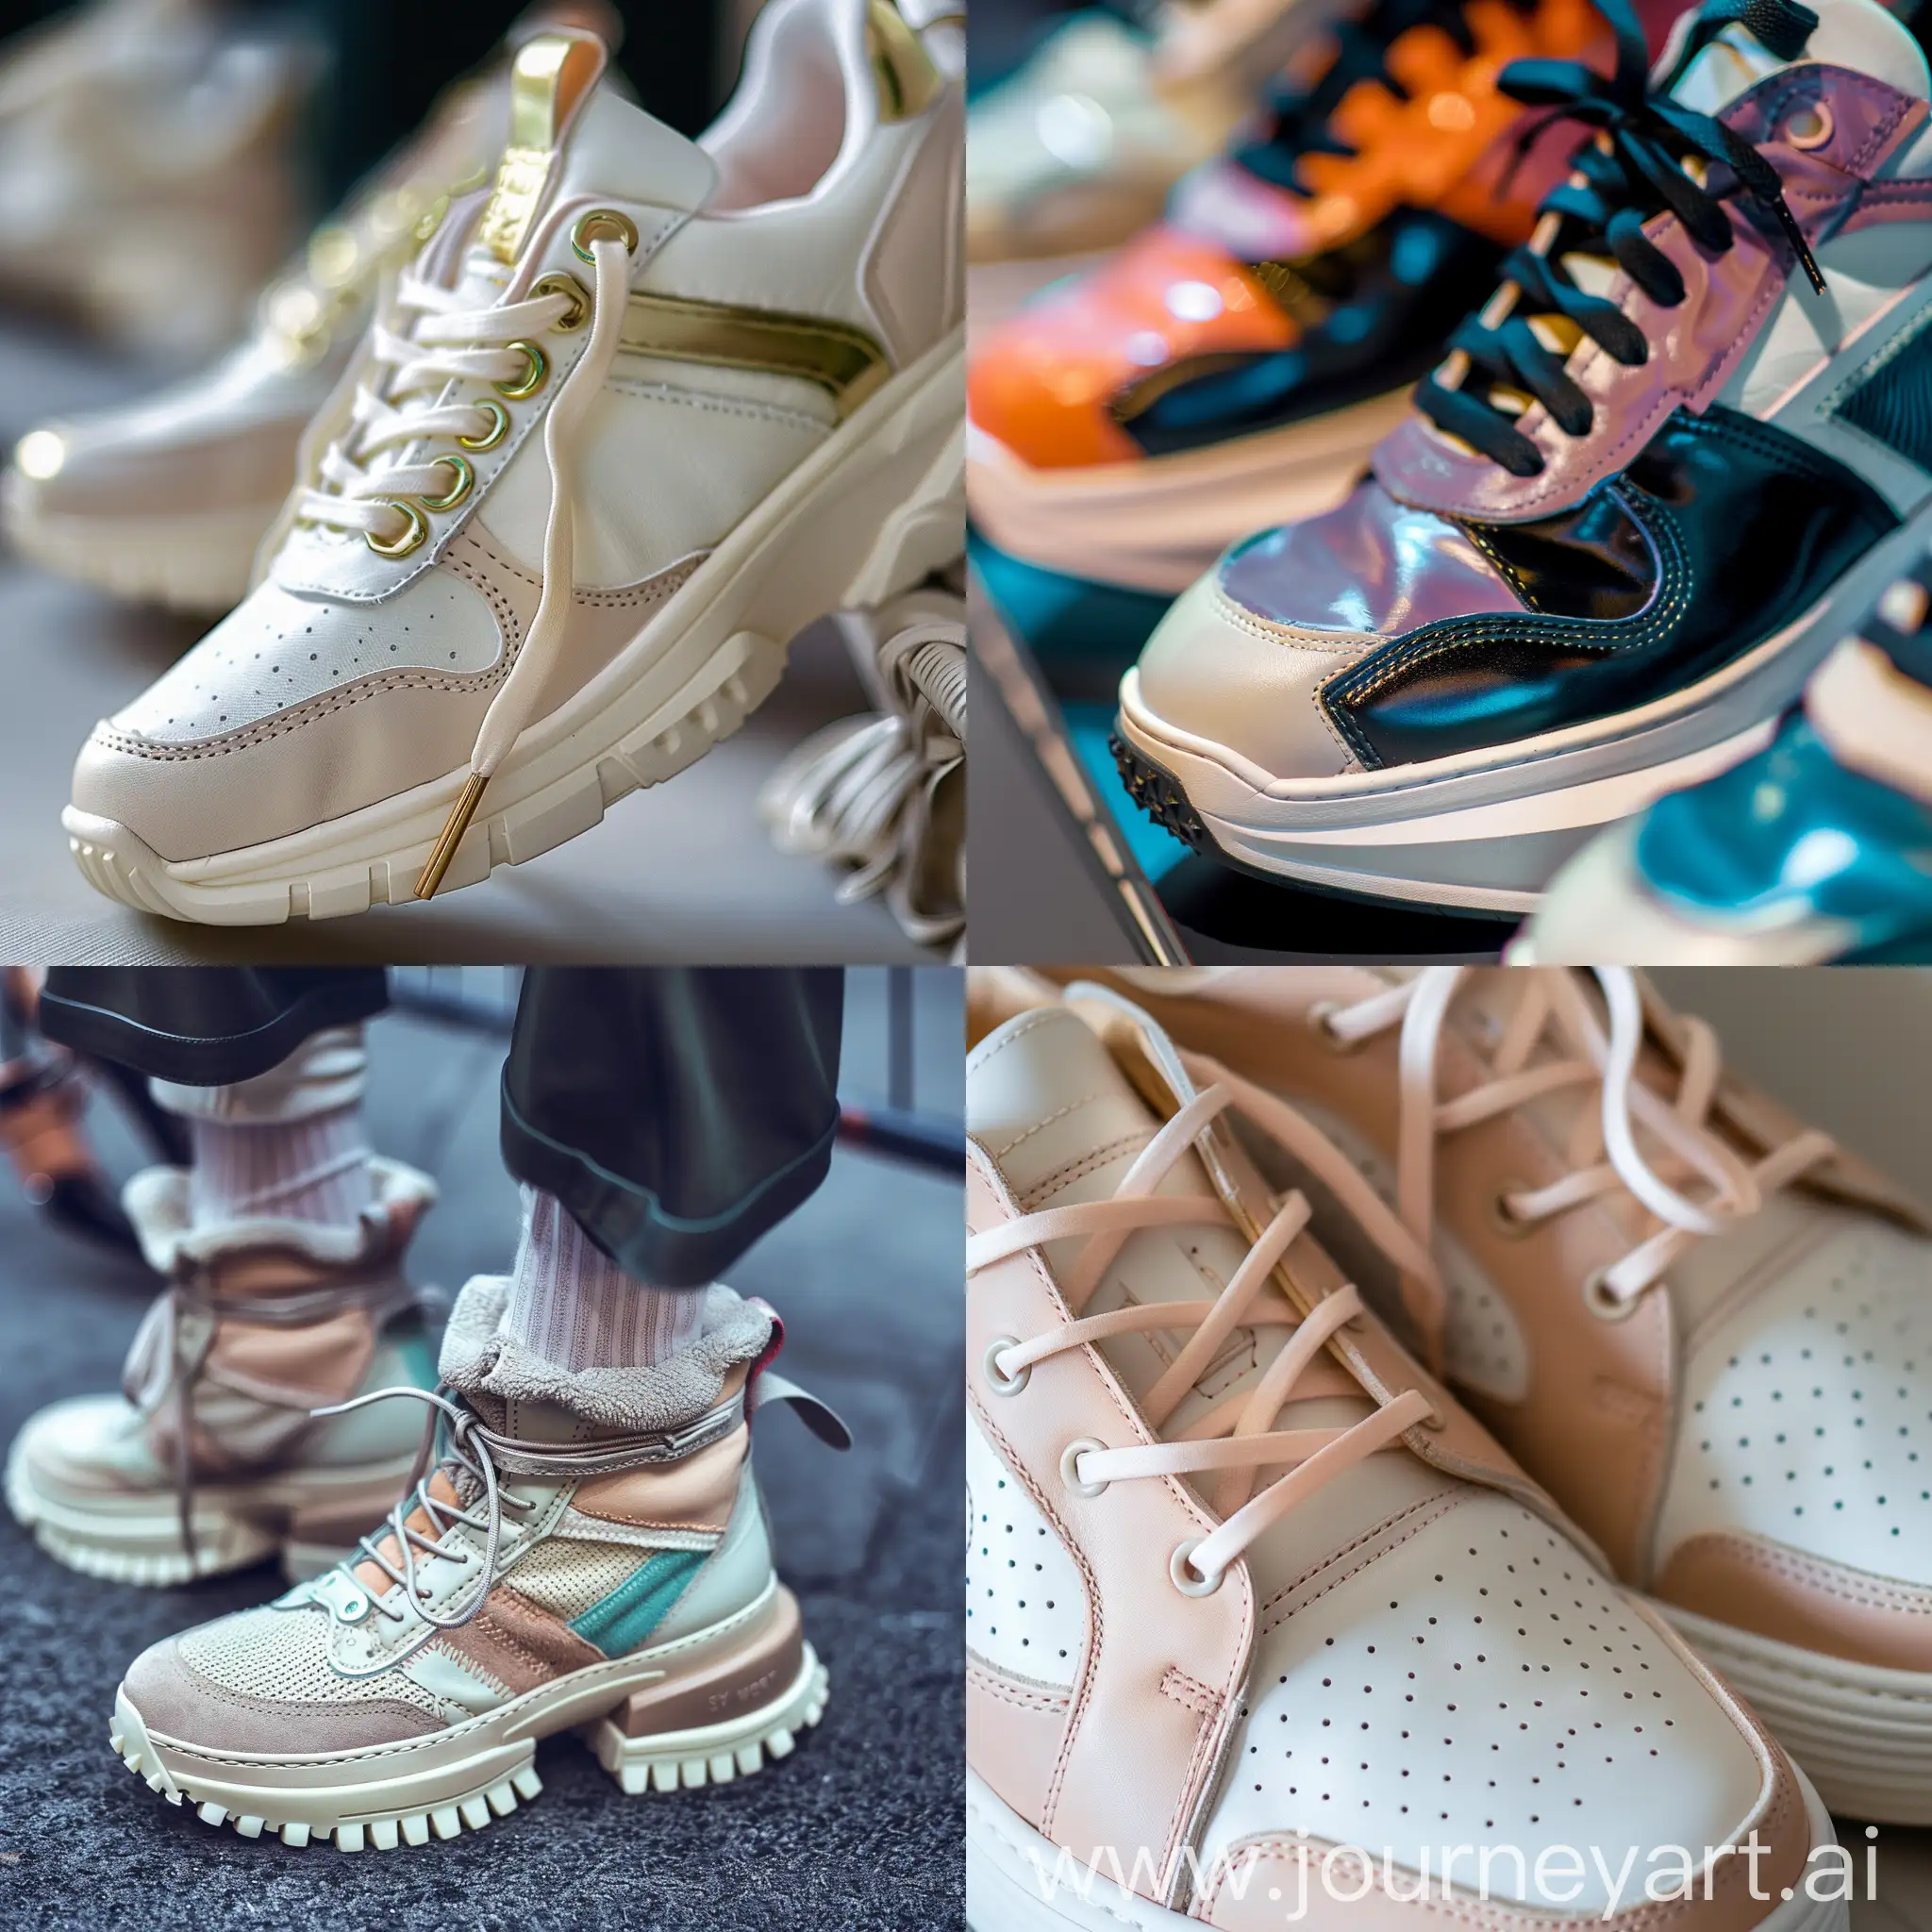 Stylish-Womens-Sneakers-in-High-Fashion-Closeup-View